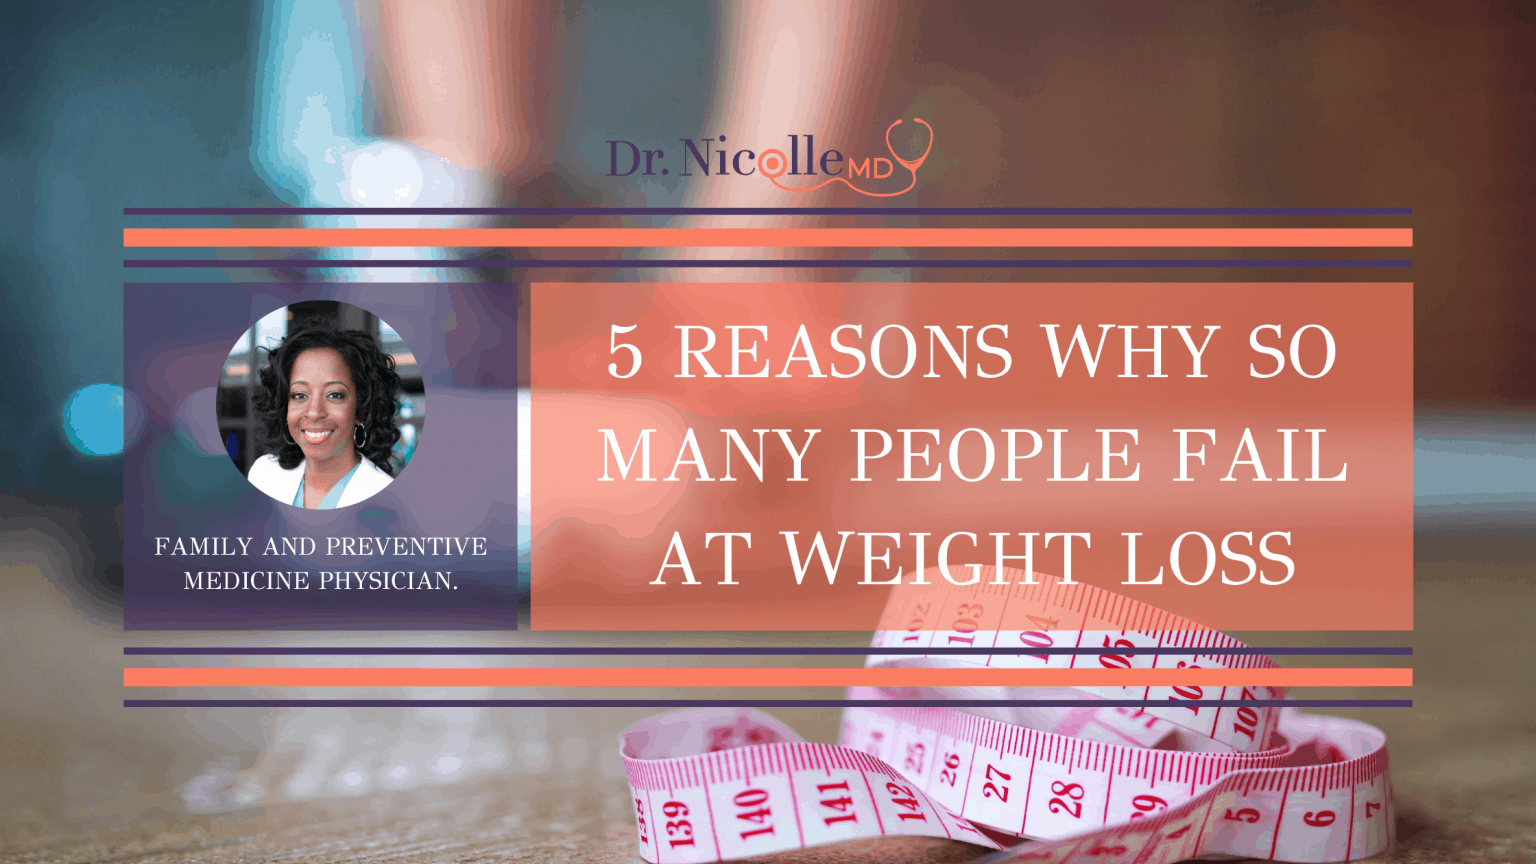 5-reasons-why-so-many-people-fail-at-weight-loss-dr-nicolle